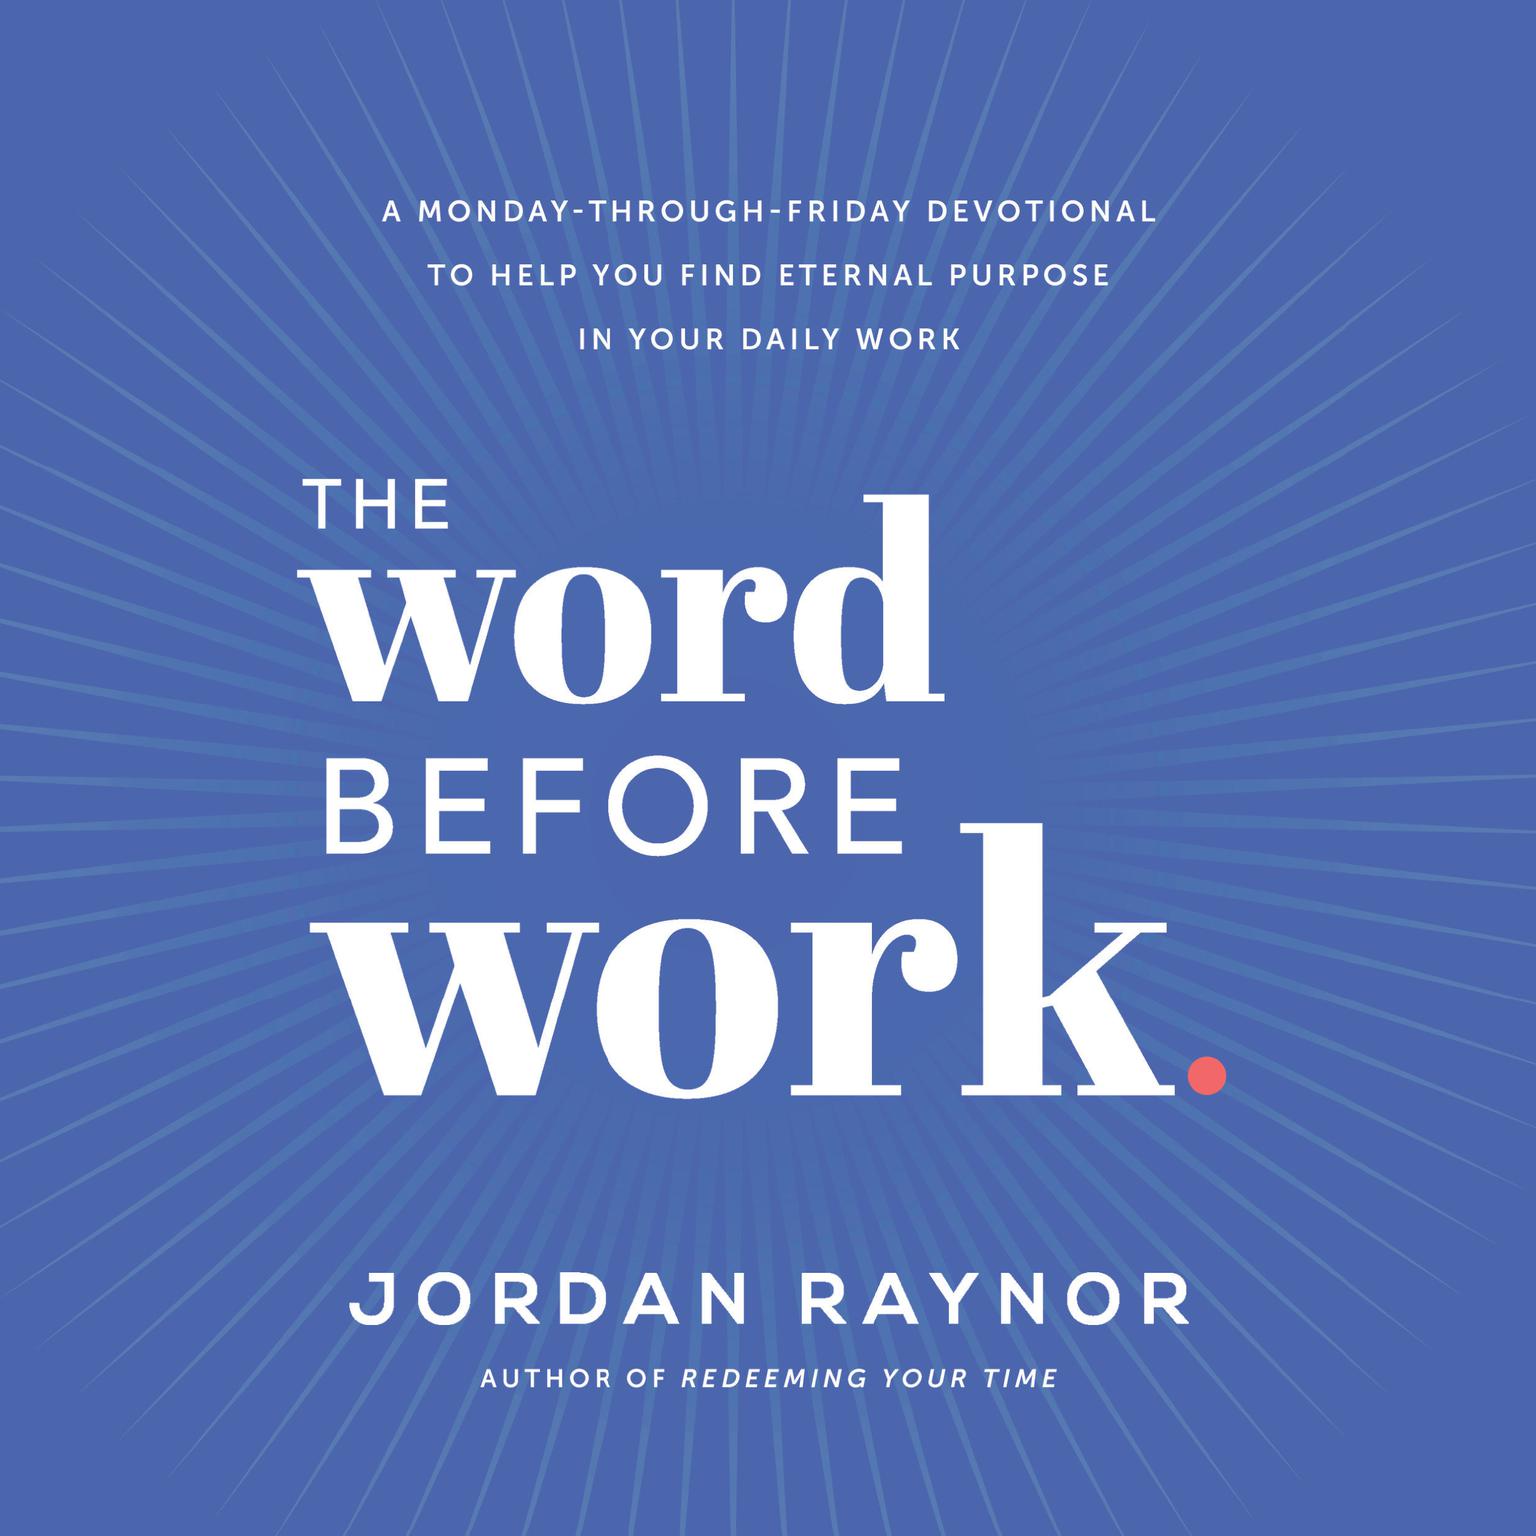 The Word Before Work: A Monday-Through-Friday Devotional to Help You Find Eternal Purpose in Your Daily Work Audiobook, by Jordan Raynor